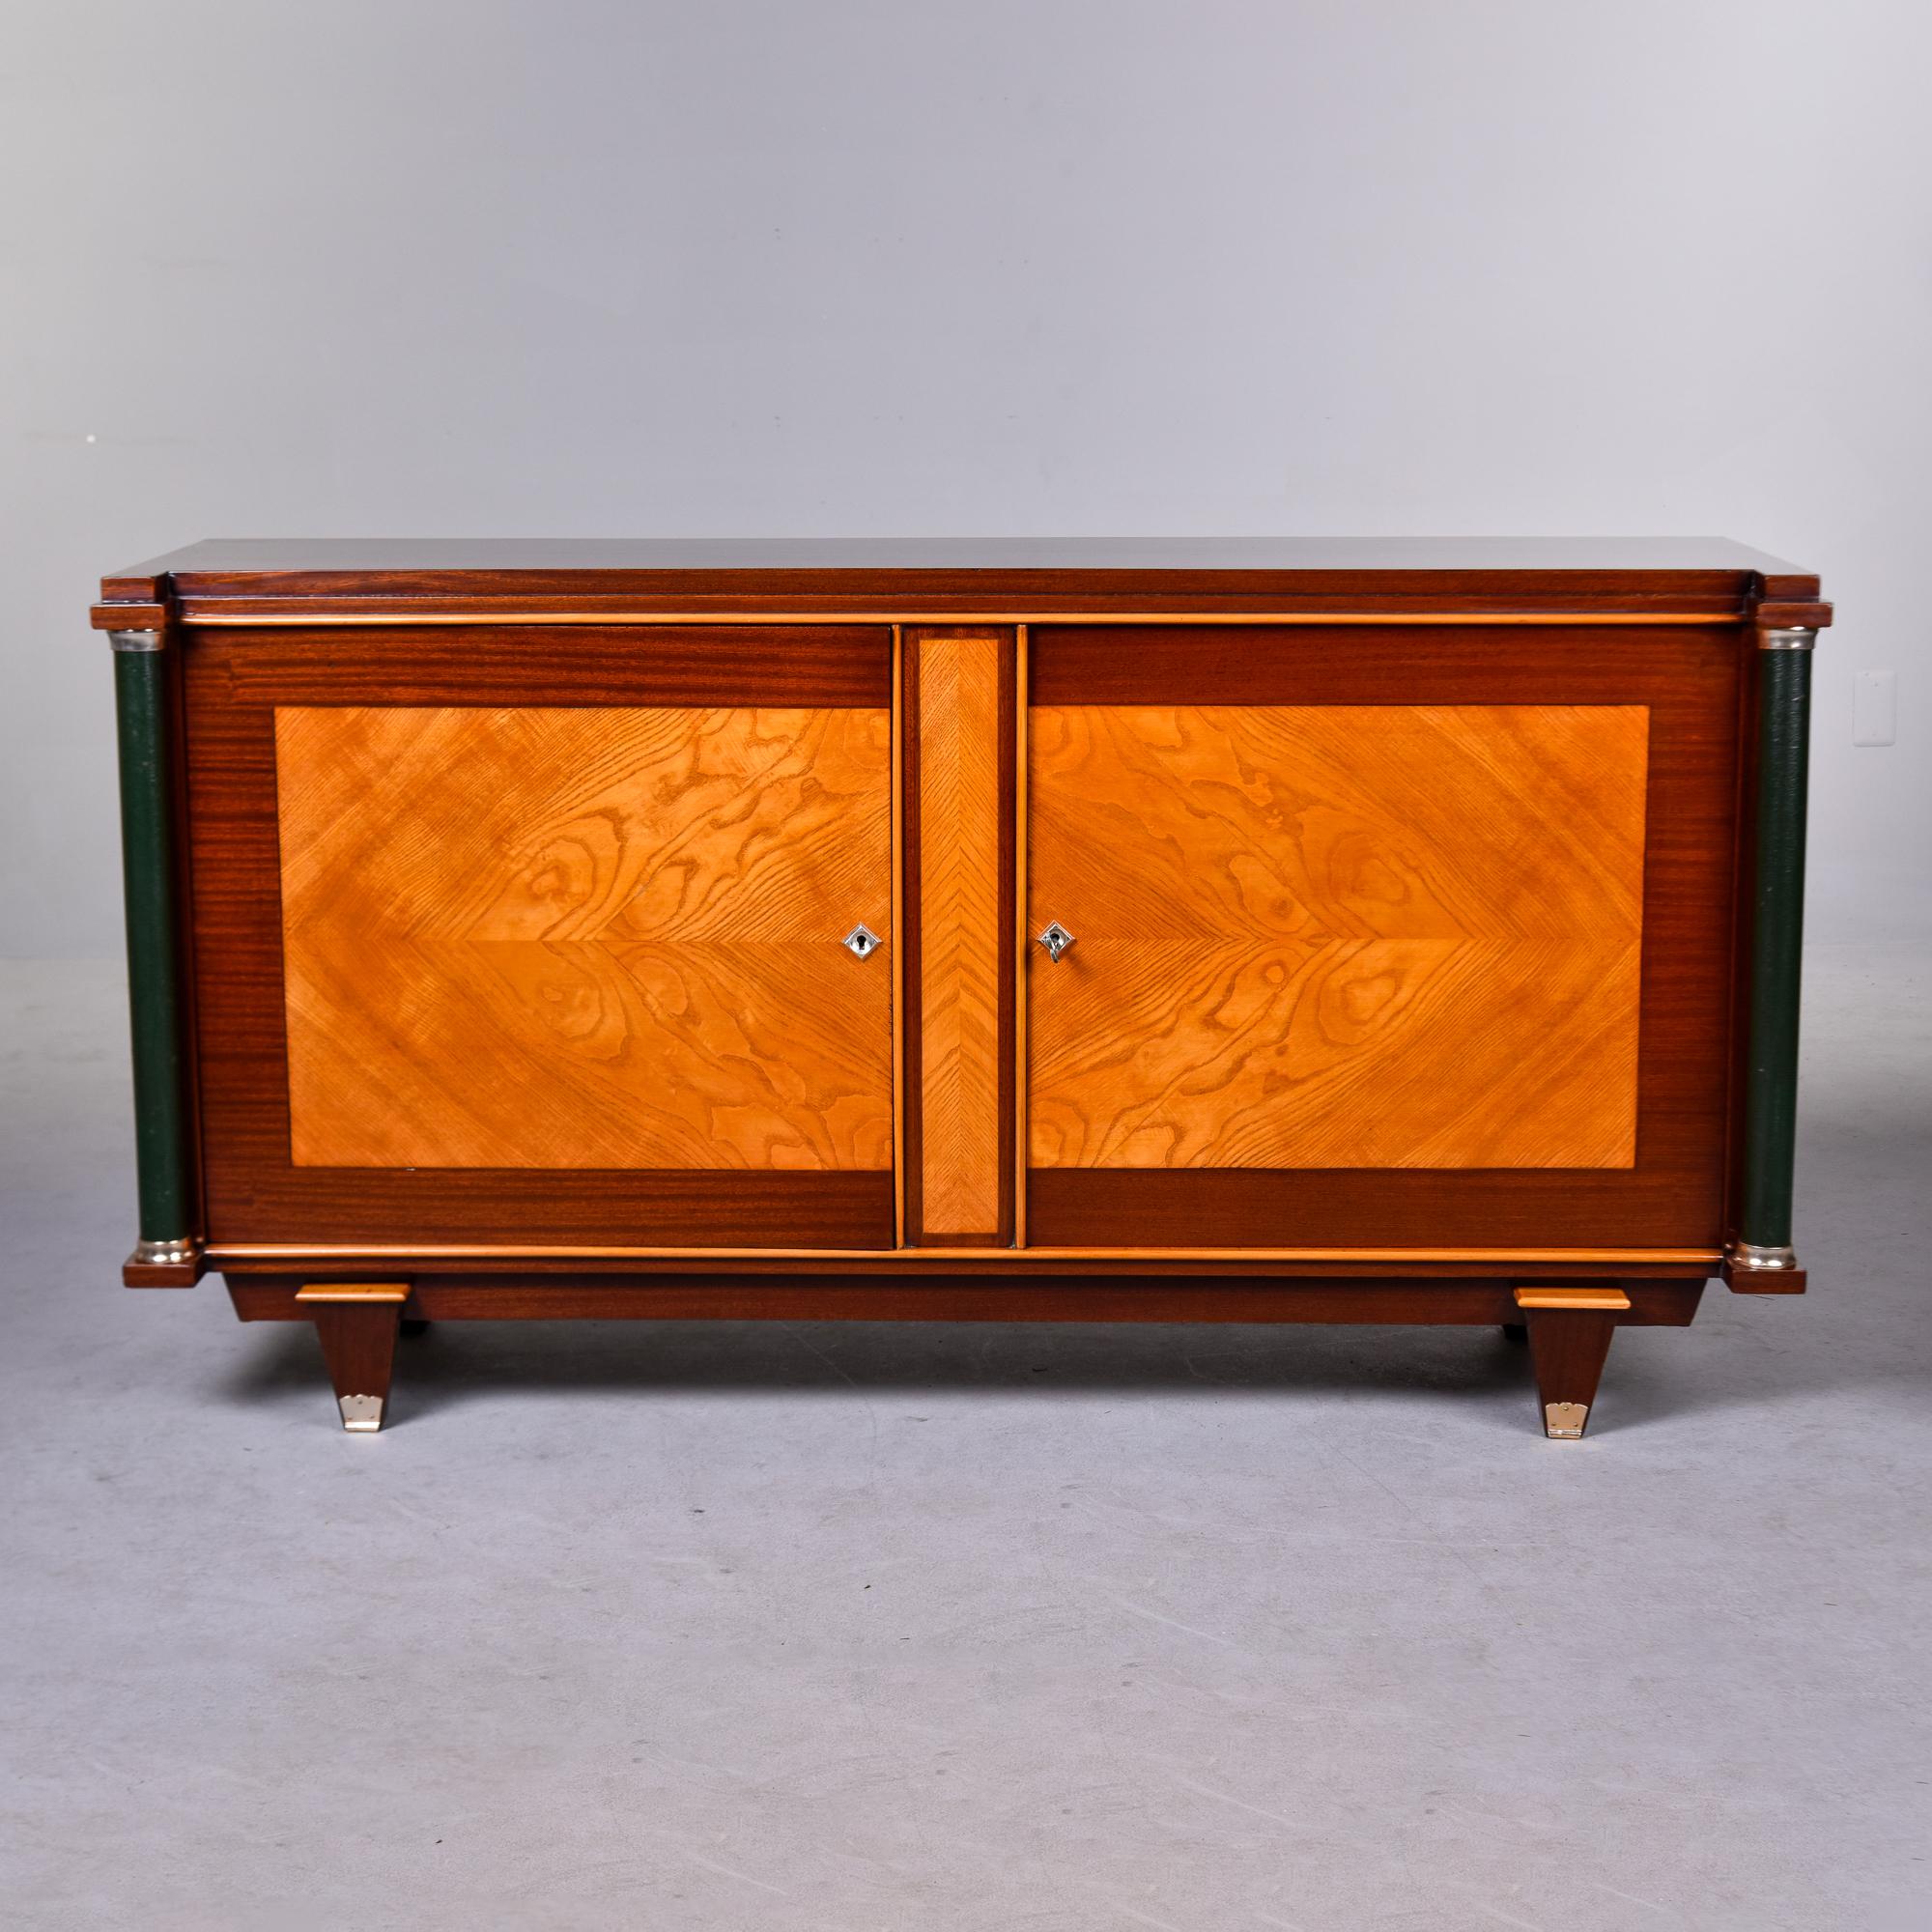 French Art Deco polished mahogany cabinet with leather covered pillar detail.

Found in France, this buffet cabinet or credenza dates from the 1930s. Dark polished mahogany and a contrasting, lighter wood that we believe is maple or a blond